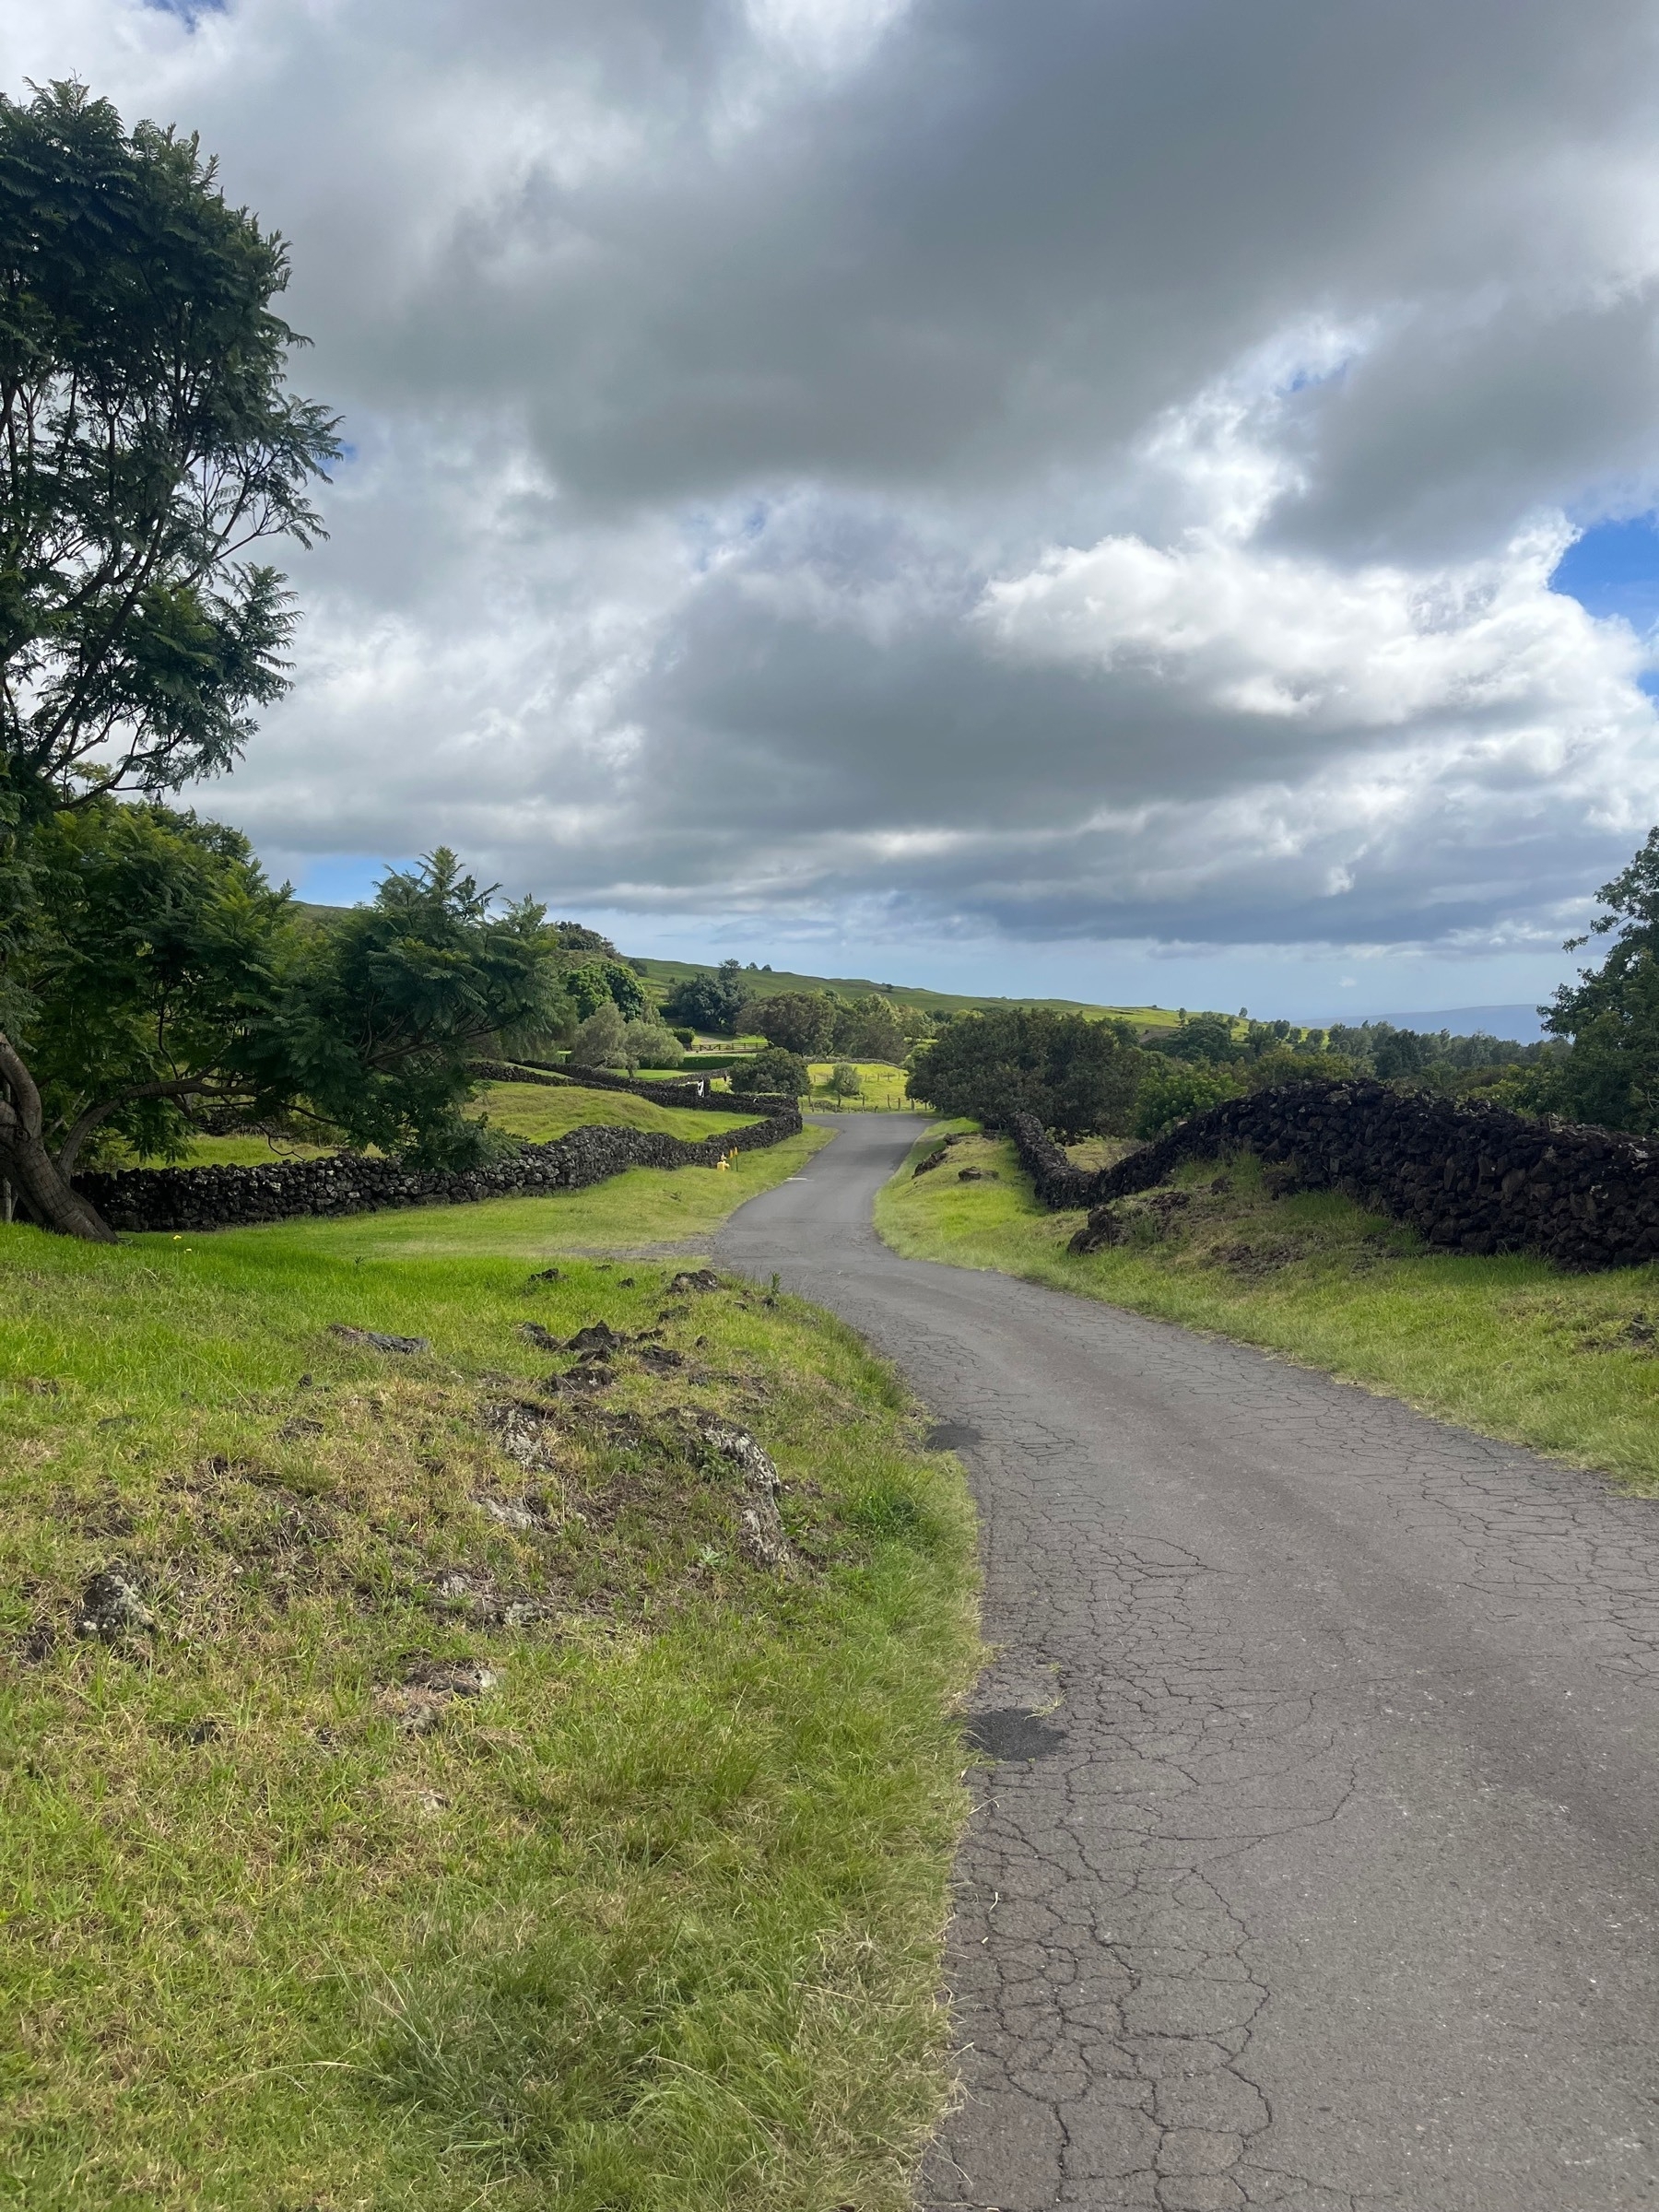 Upcountry Maui. A single track, twisty road winds between hilly fields with low lava rock walls